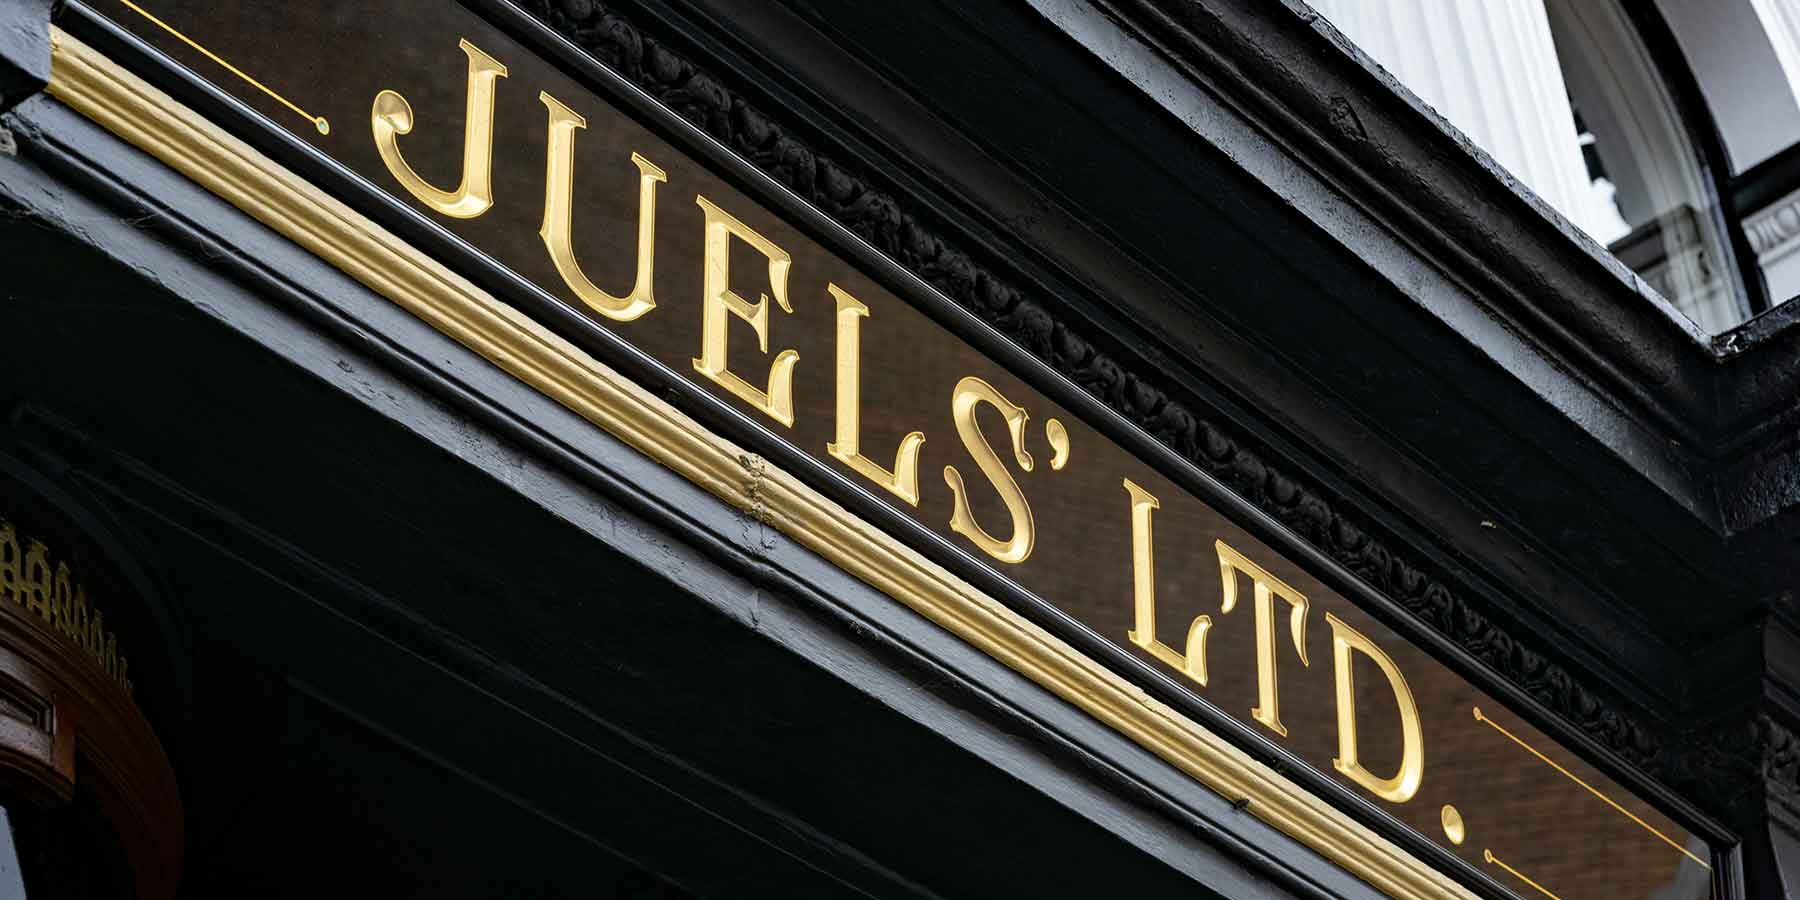 Juels Limited Specialist Store